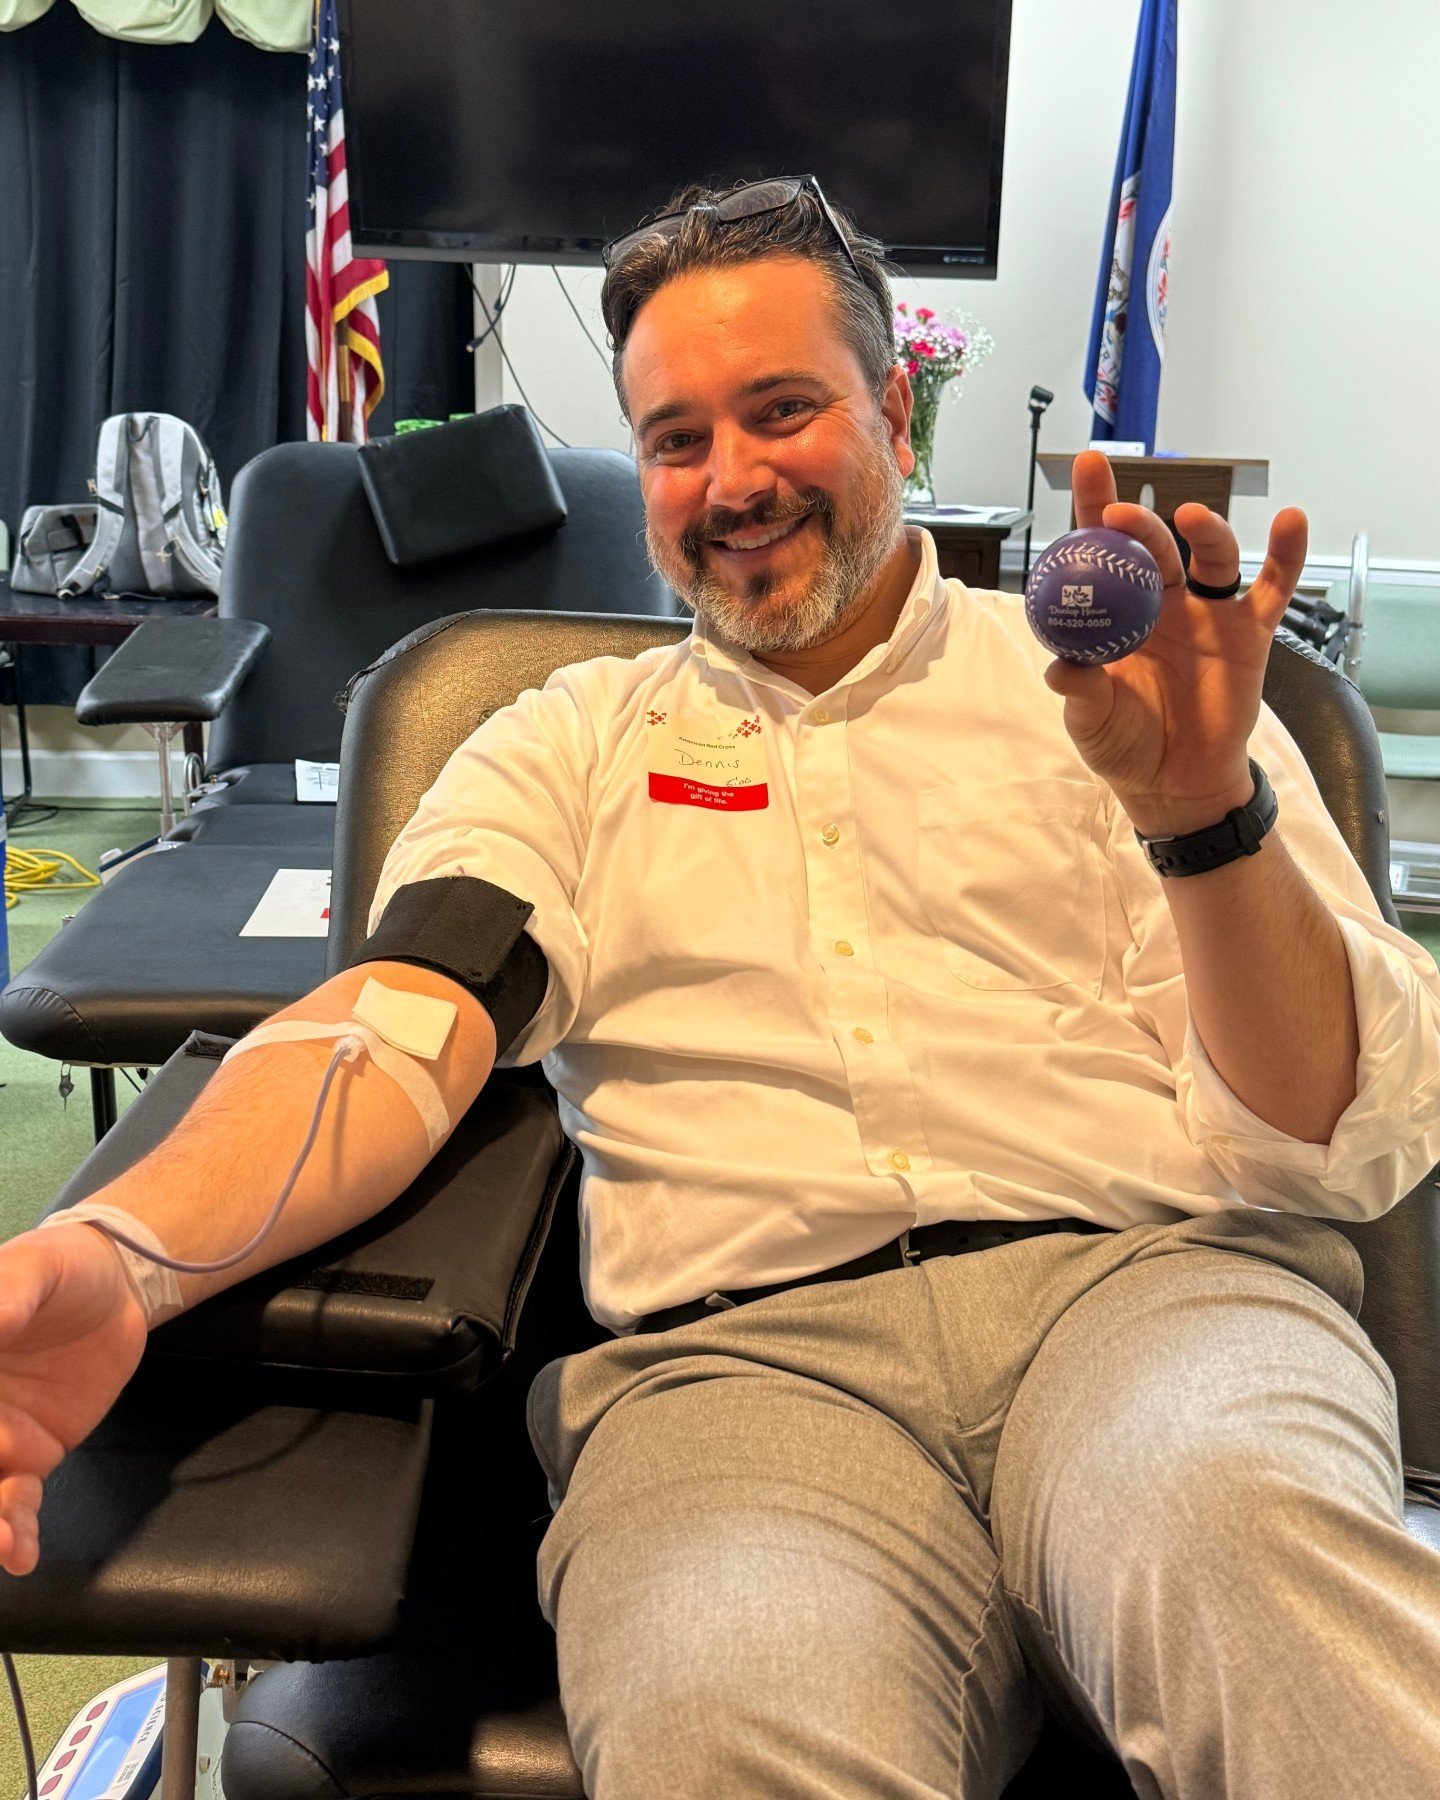 Thank you to everyone who joined us in giving the gift of life! 🩸💜 

Your kindness has the power to save lives and make a big difference in our community.

#GiveBlood #SaveLives #CommunityHeroes #BeAHero